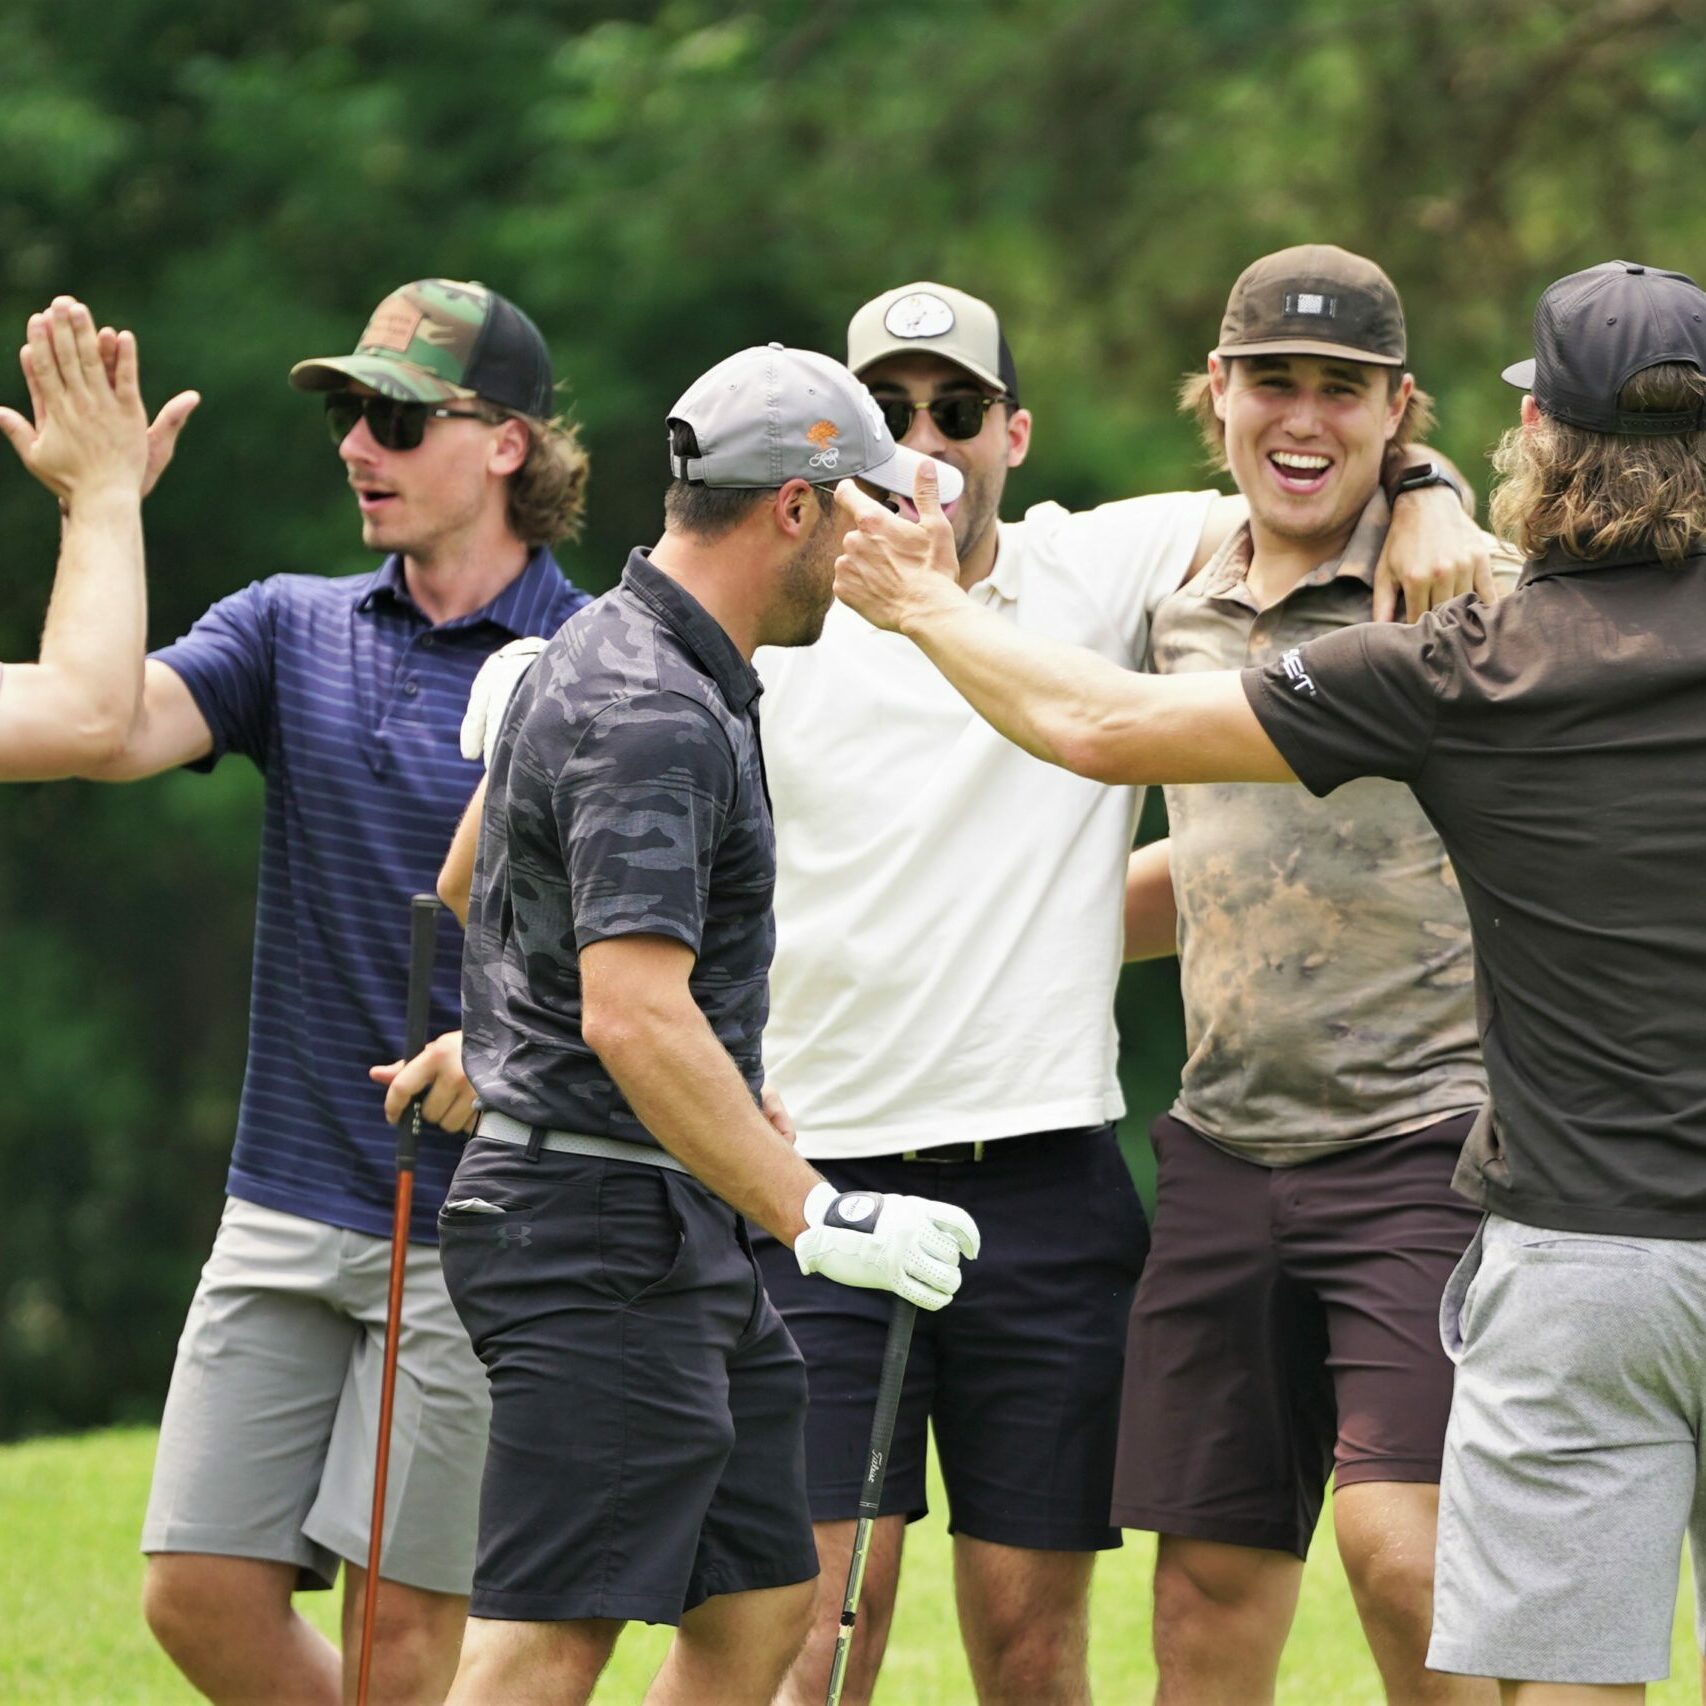 Zach Whitecloud, second from right, is mobbed by his teammates after sinking a long putt on hole No. 2 during the 26th annual Galen Nagle Memorial Golf Tournament on Friday, July 14, 2023, at the Bemidji Town and Country Club. (Micah Friez / Bemidji State)